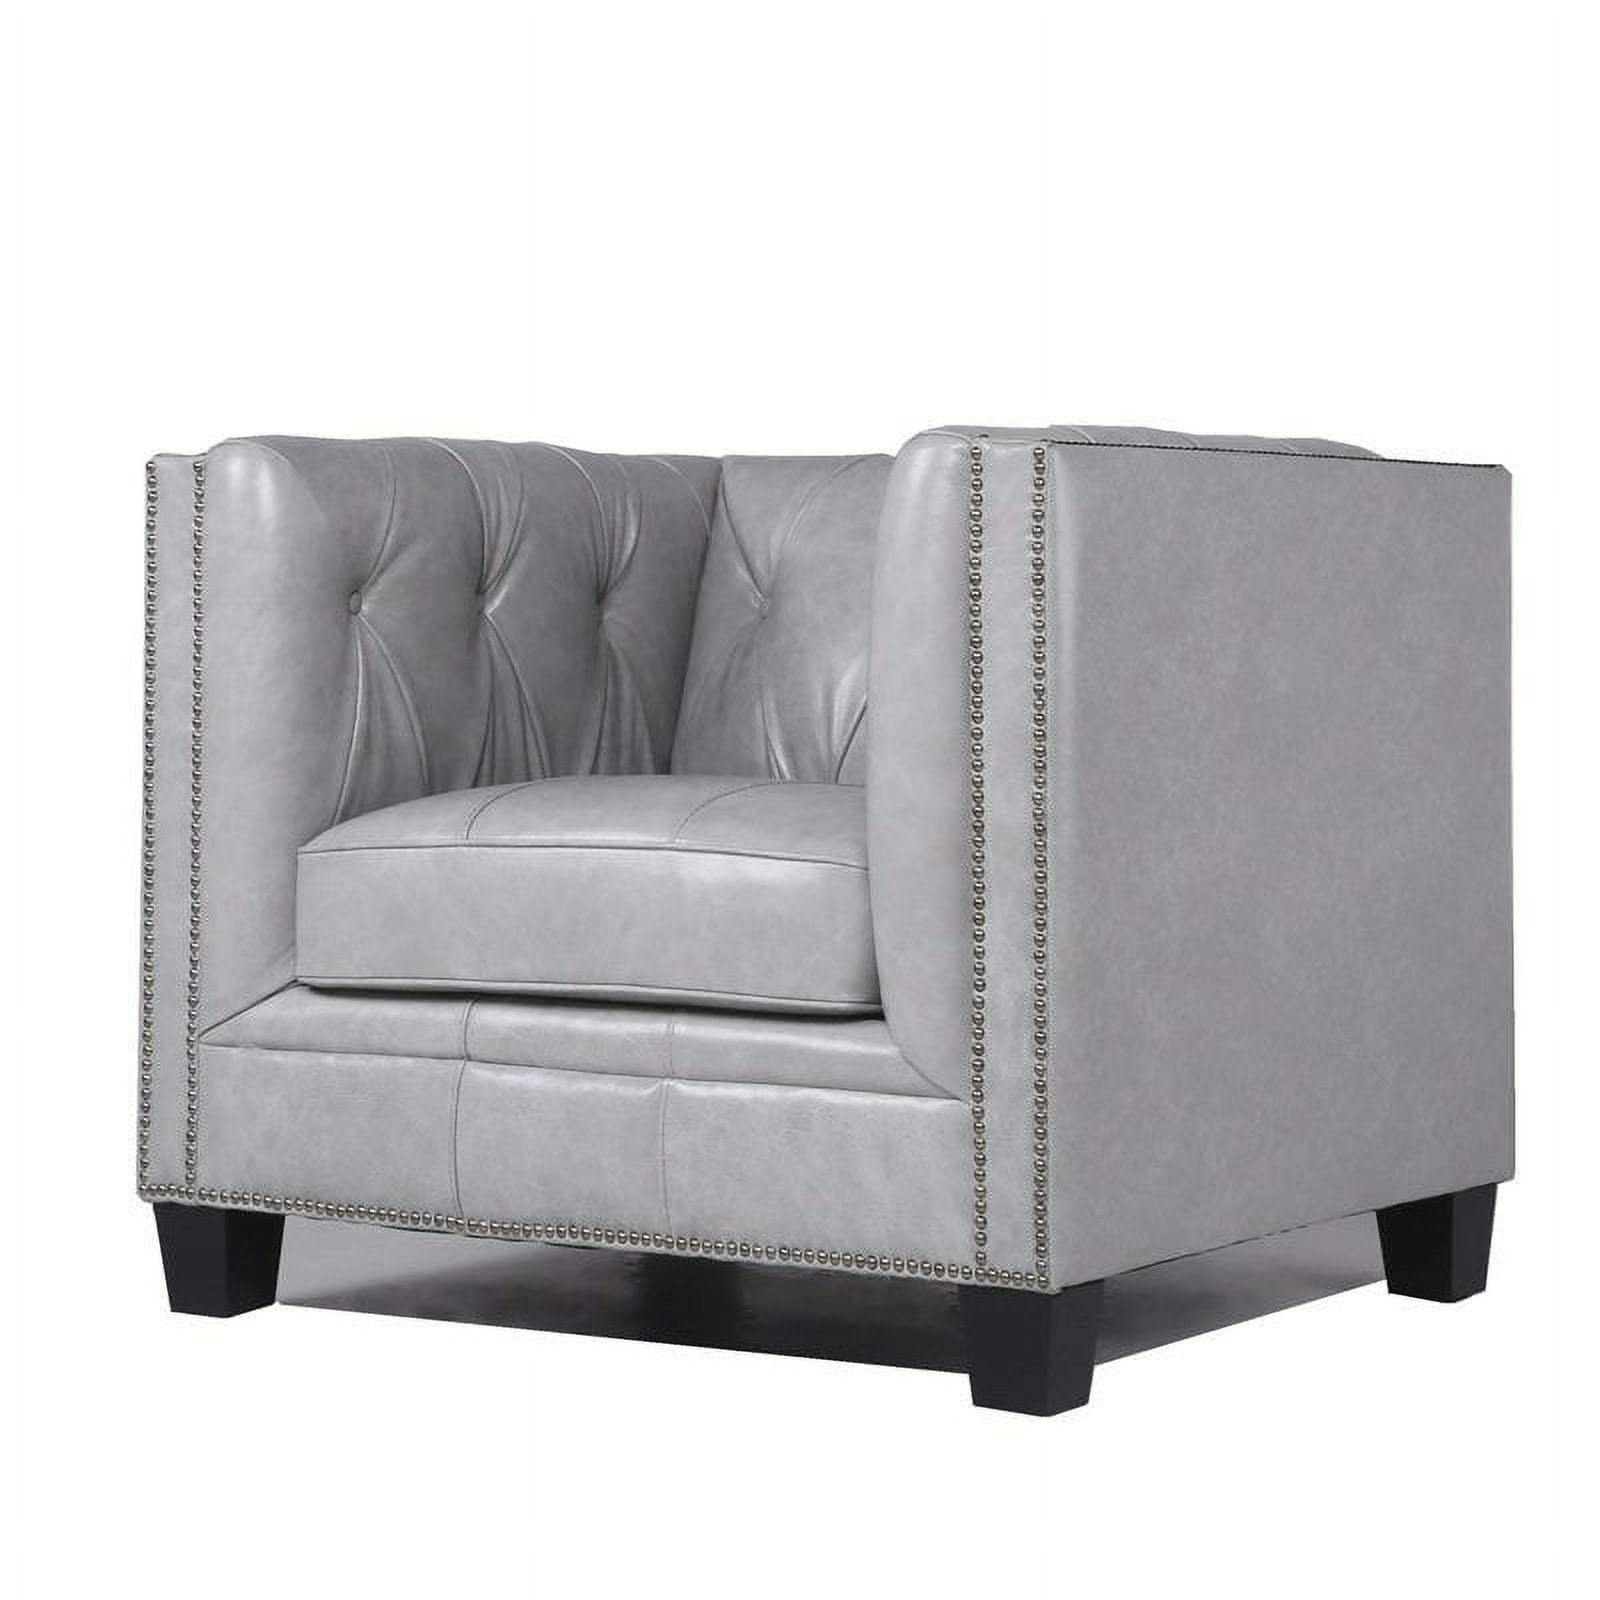 Elegant Gray Leather Chesterfield Accent Chair with Tufted Back